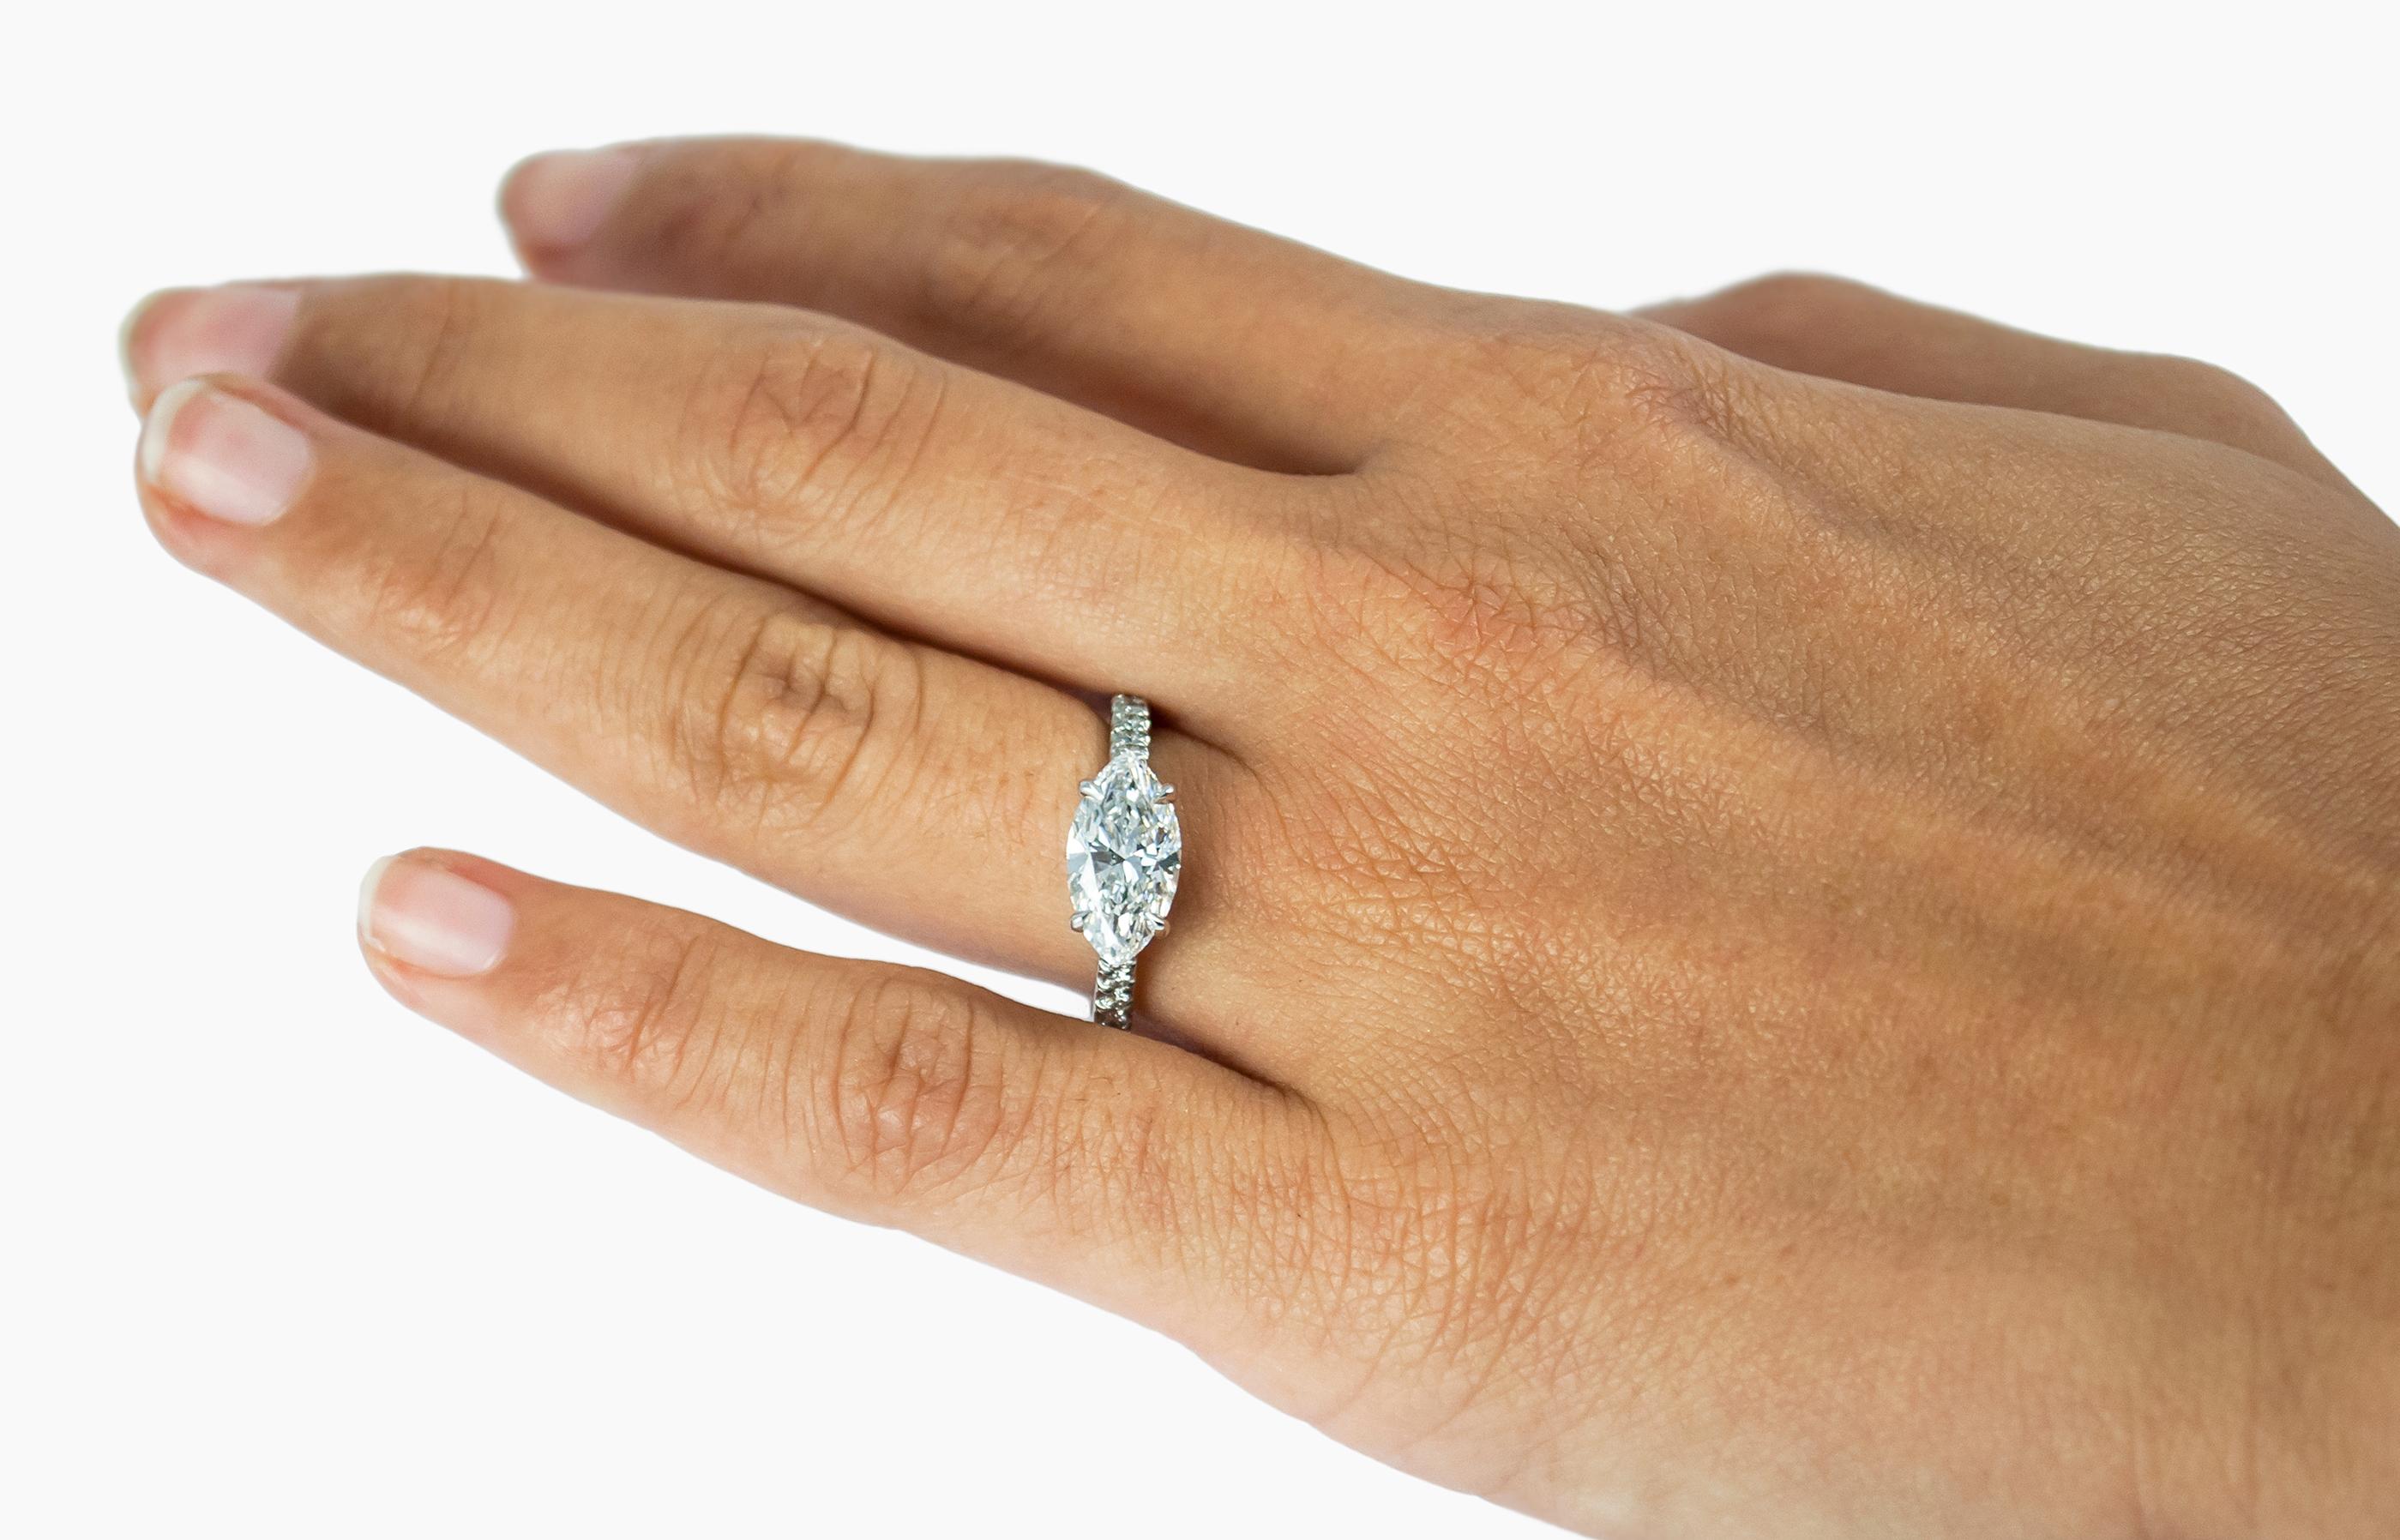 This J. Birnbach marquise cut diamond ring is beautifully unique. Set east to west, it spreads across the finger nicely and is a truly gorgeous piece - contemporary and charming. Set in platinum with a diamond pave shank. 

This piece comes with a